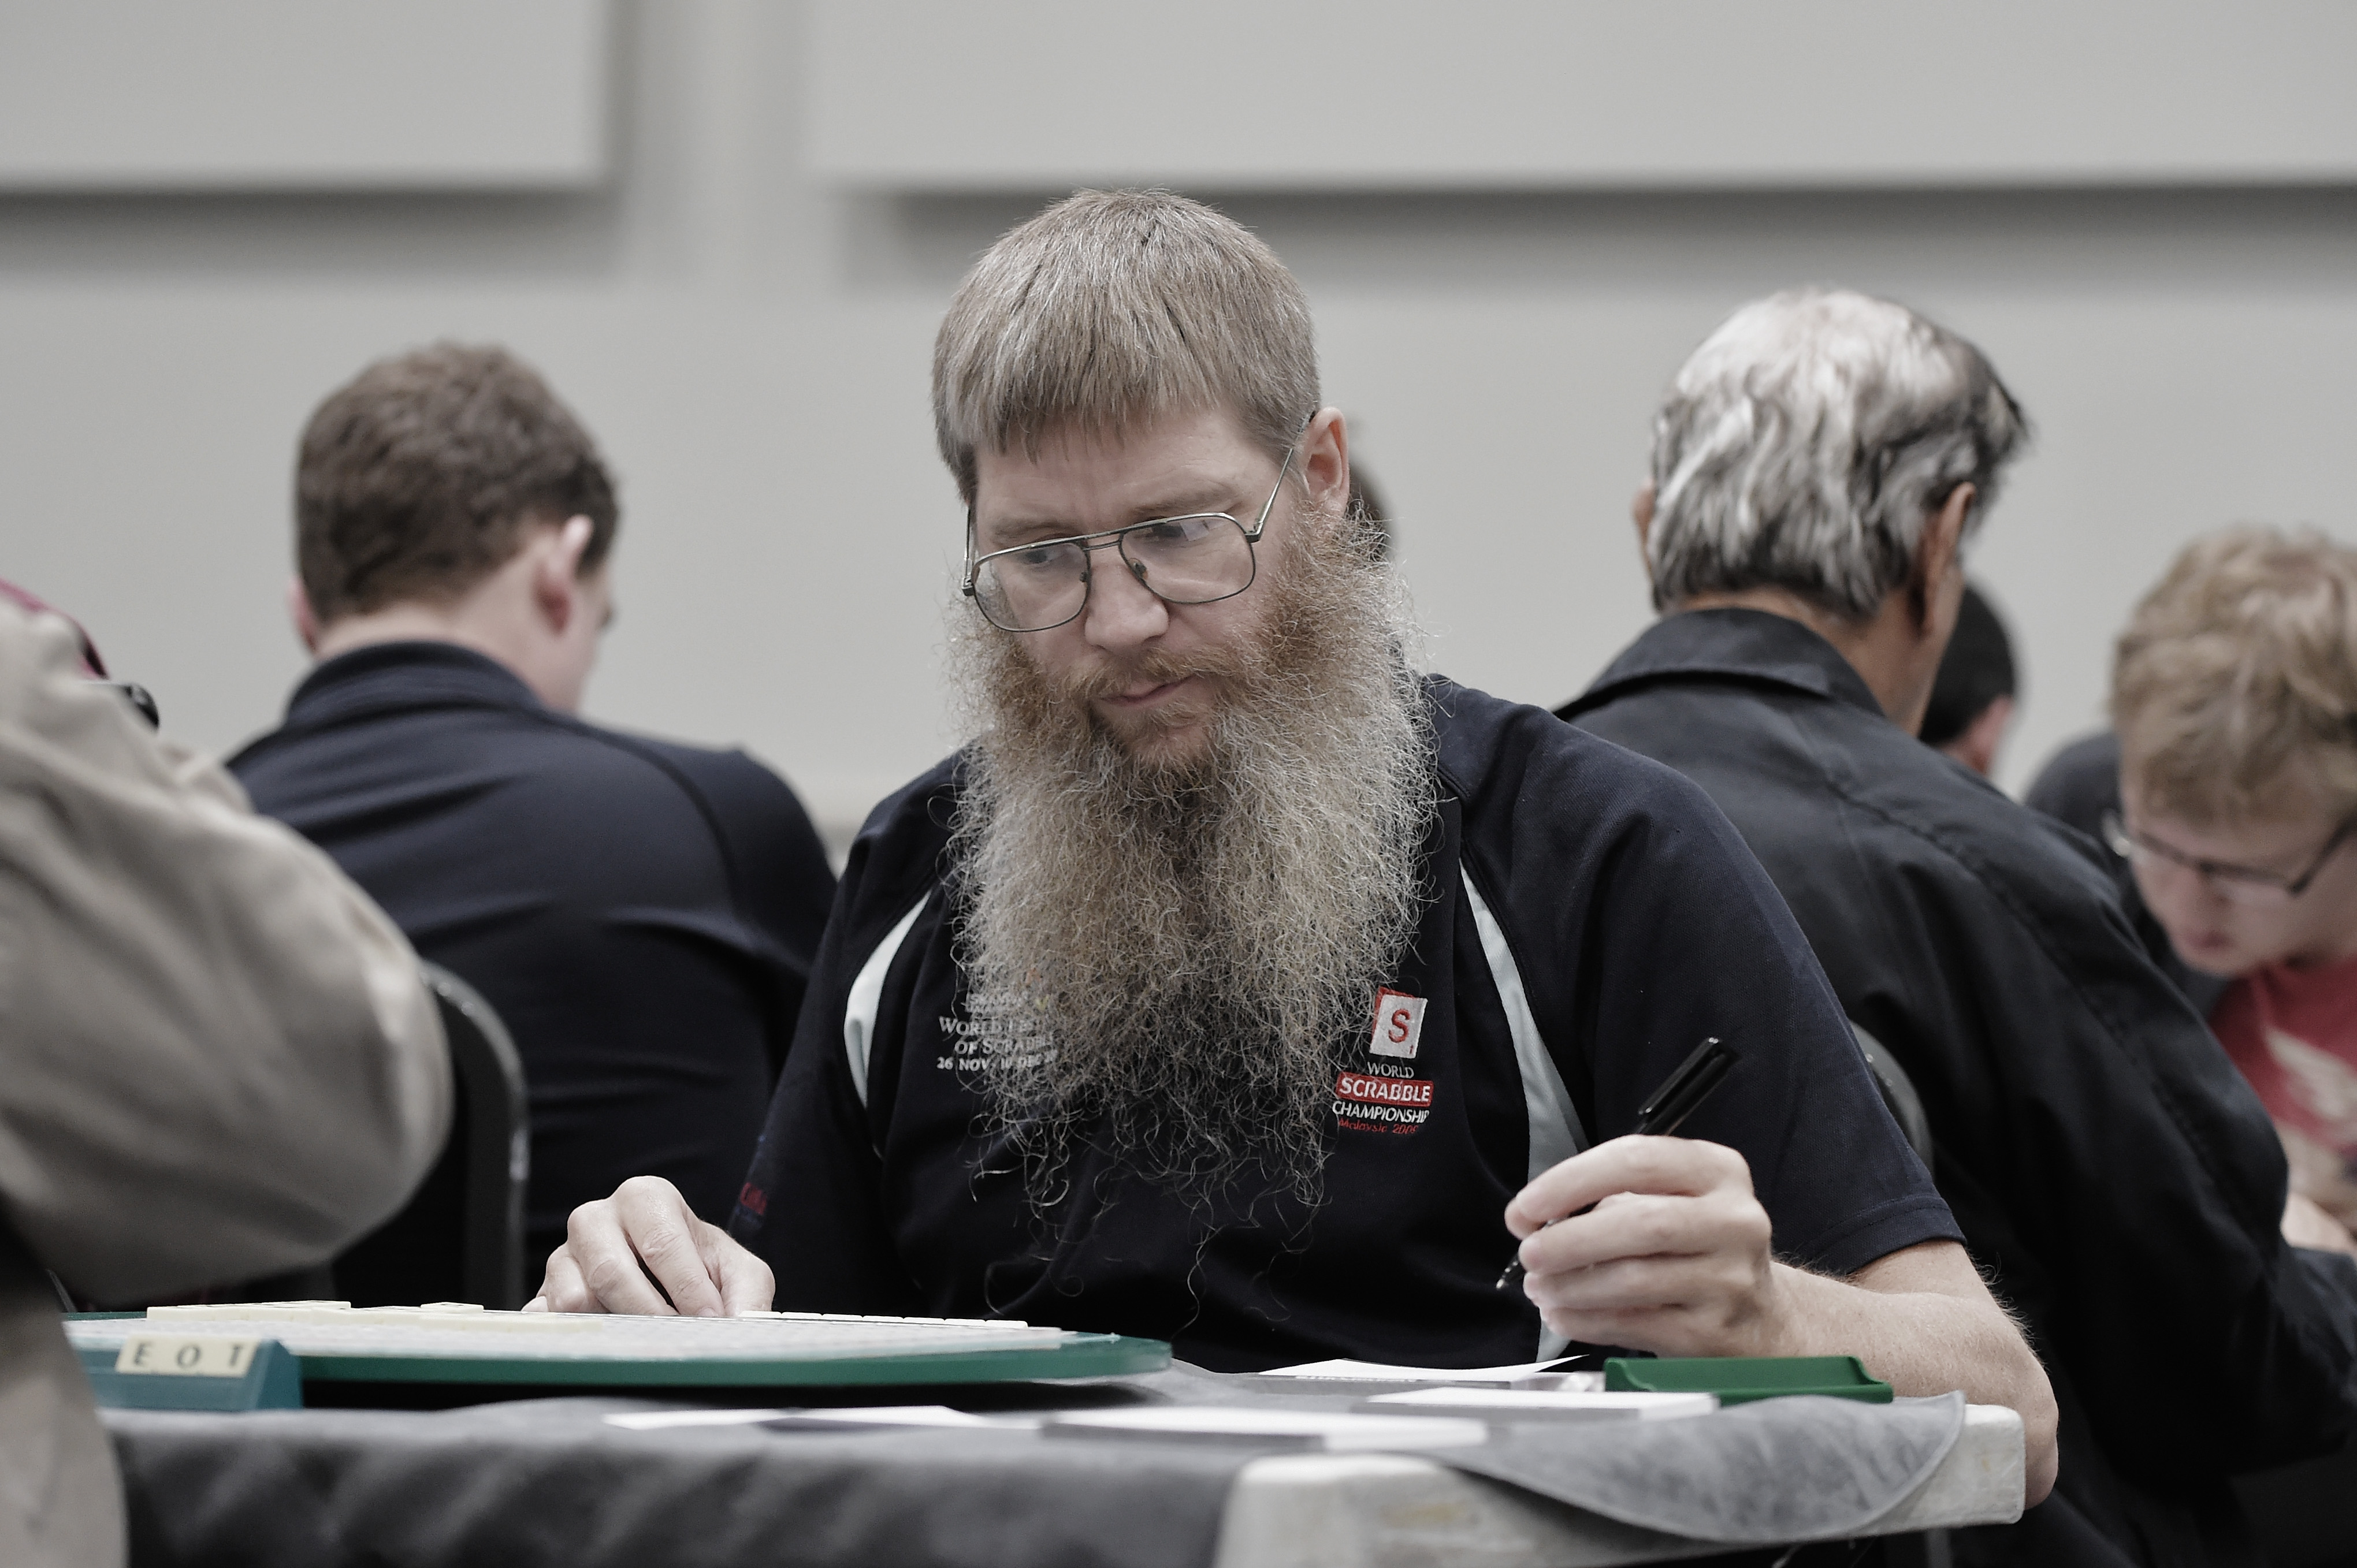 Current World Champion Nigel Richards at the Scrabble Champions Tournament, during the Mind Sports International World Championships on November 19, 2014 in London, England. (Gareth Cattermole&mdash;Getty Images)